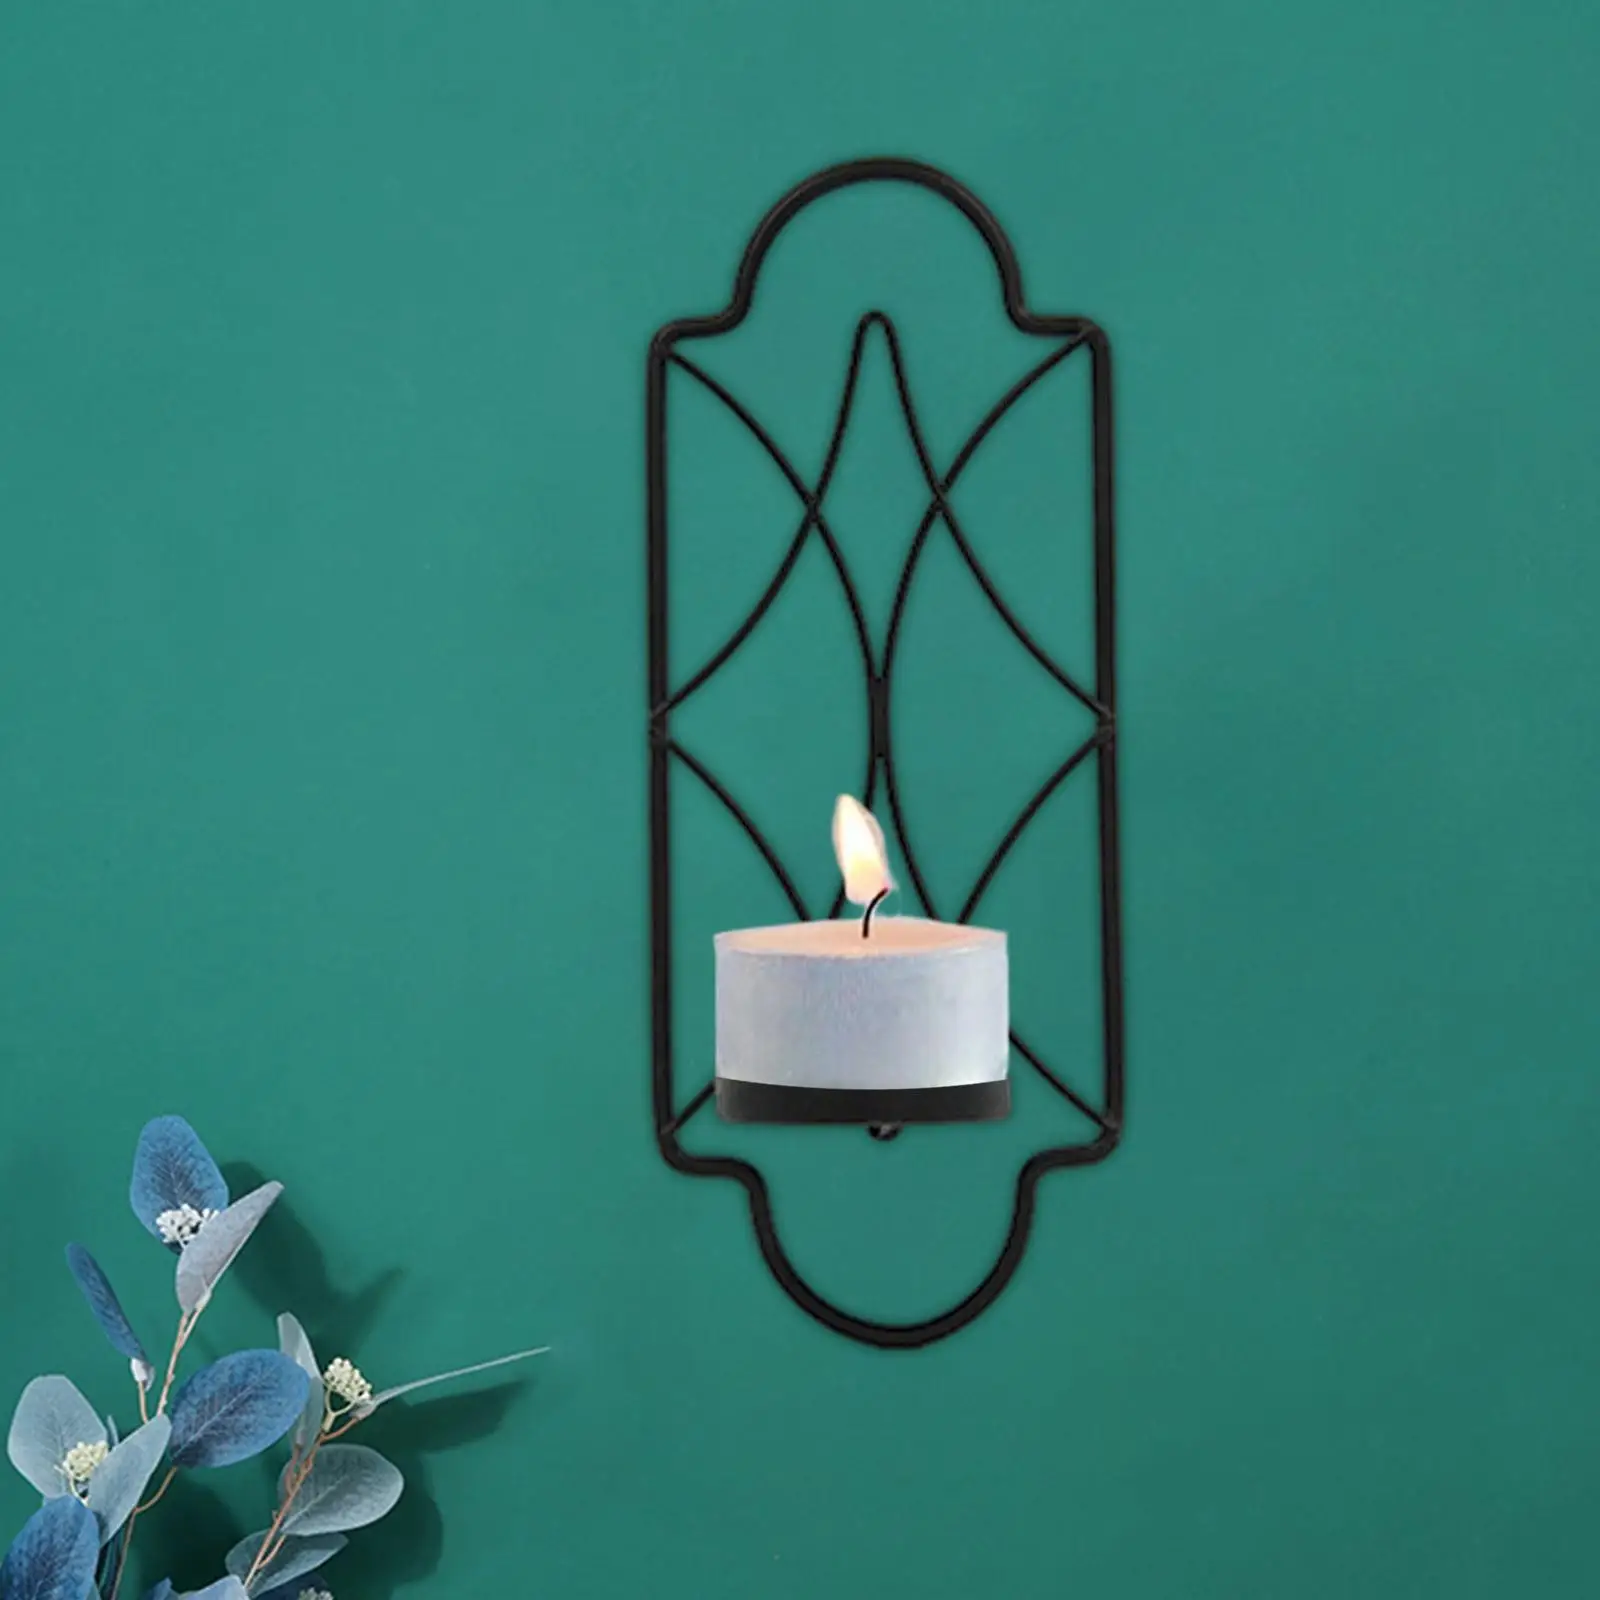 Metal Wall Hanging Sconce Candle Holder 9x22cm Handcrafted Decorative Home Decoration Tealight Holder for Wedding Events Sturdy